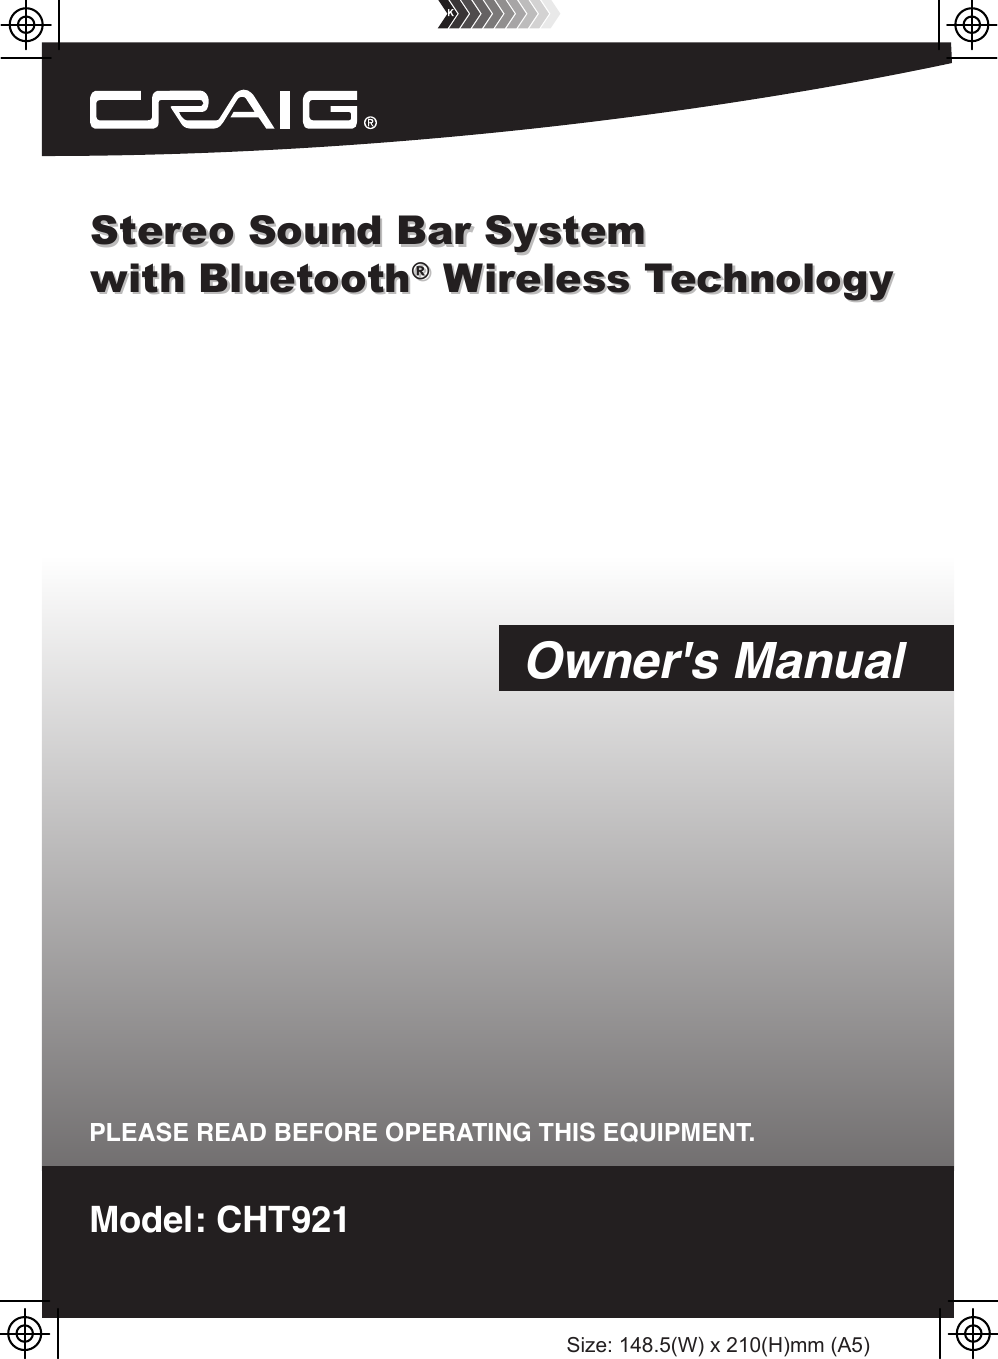 Size: 148.5(W) x 210(H)mm (A5)Stereo Sound Bar System with Bluetooth® Wireless TechnologyStereo Sound Bar System with Bluetooth® Wireless TechnologyModel: CHT921PLEASE READ BEFORE OPERATING THIS EQUIPMENT.Owner&apos;s Manual